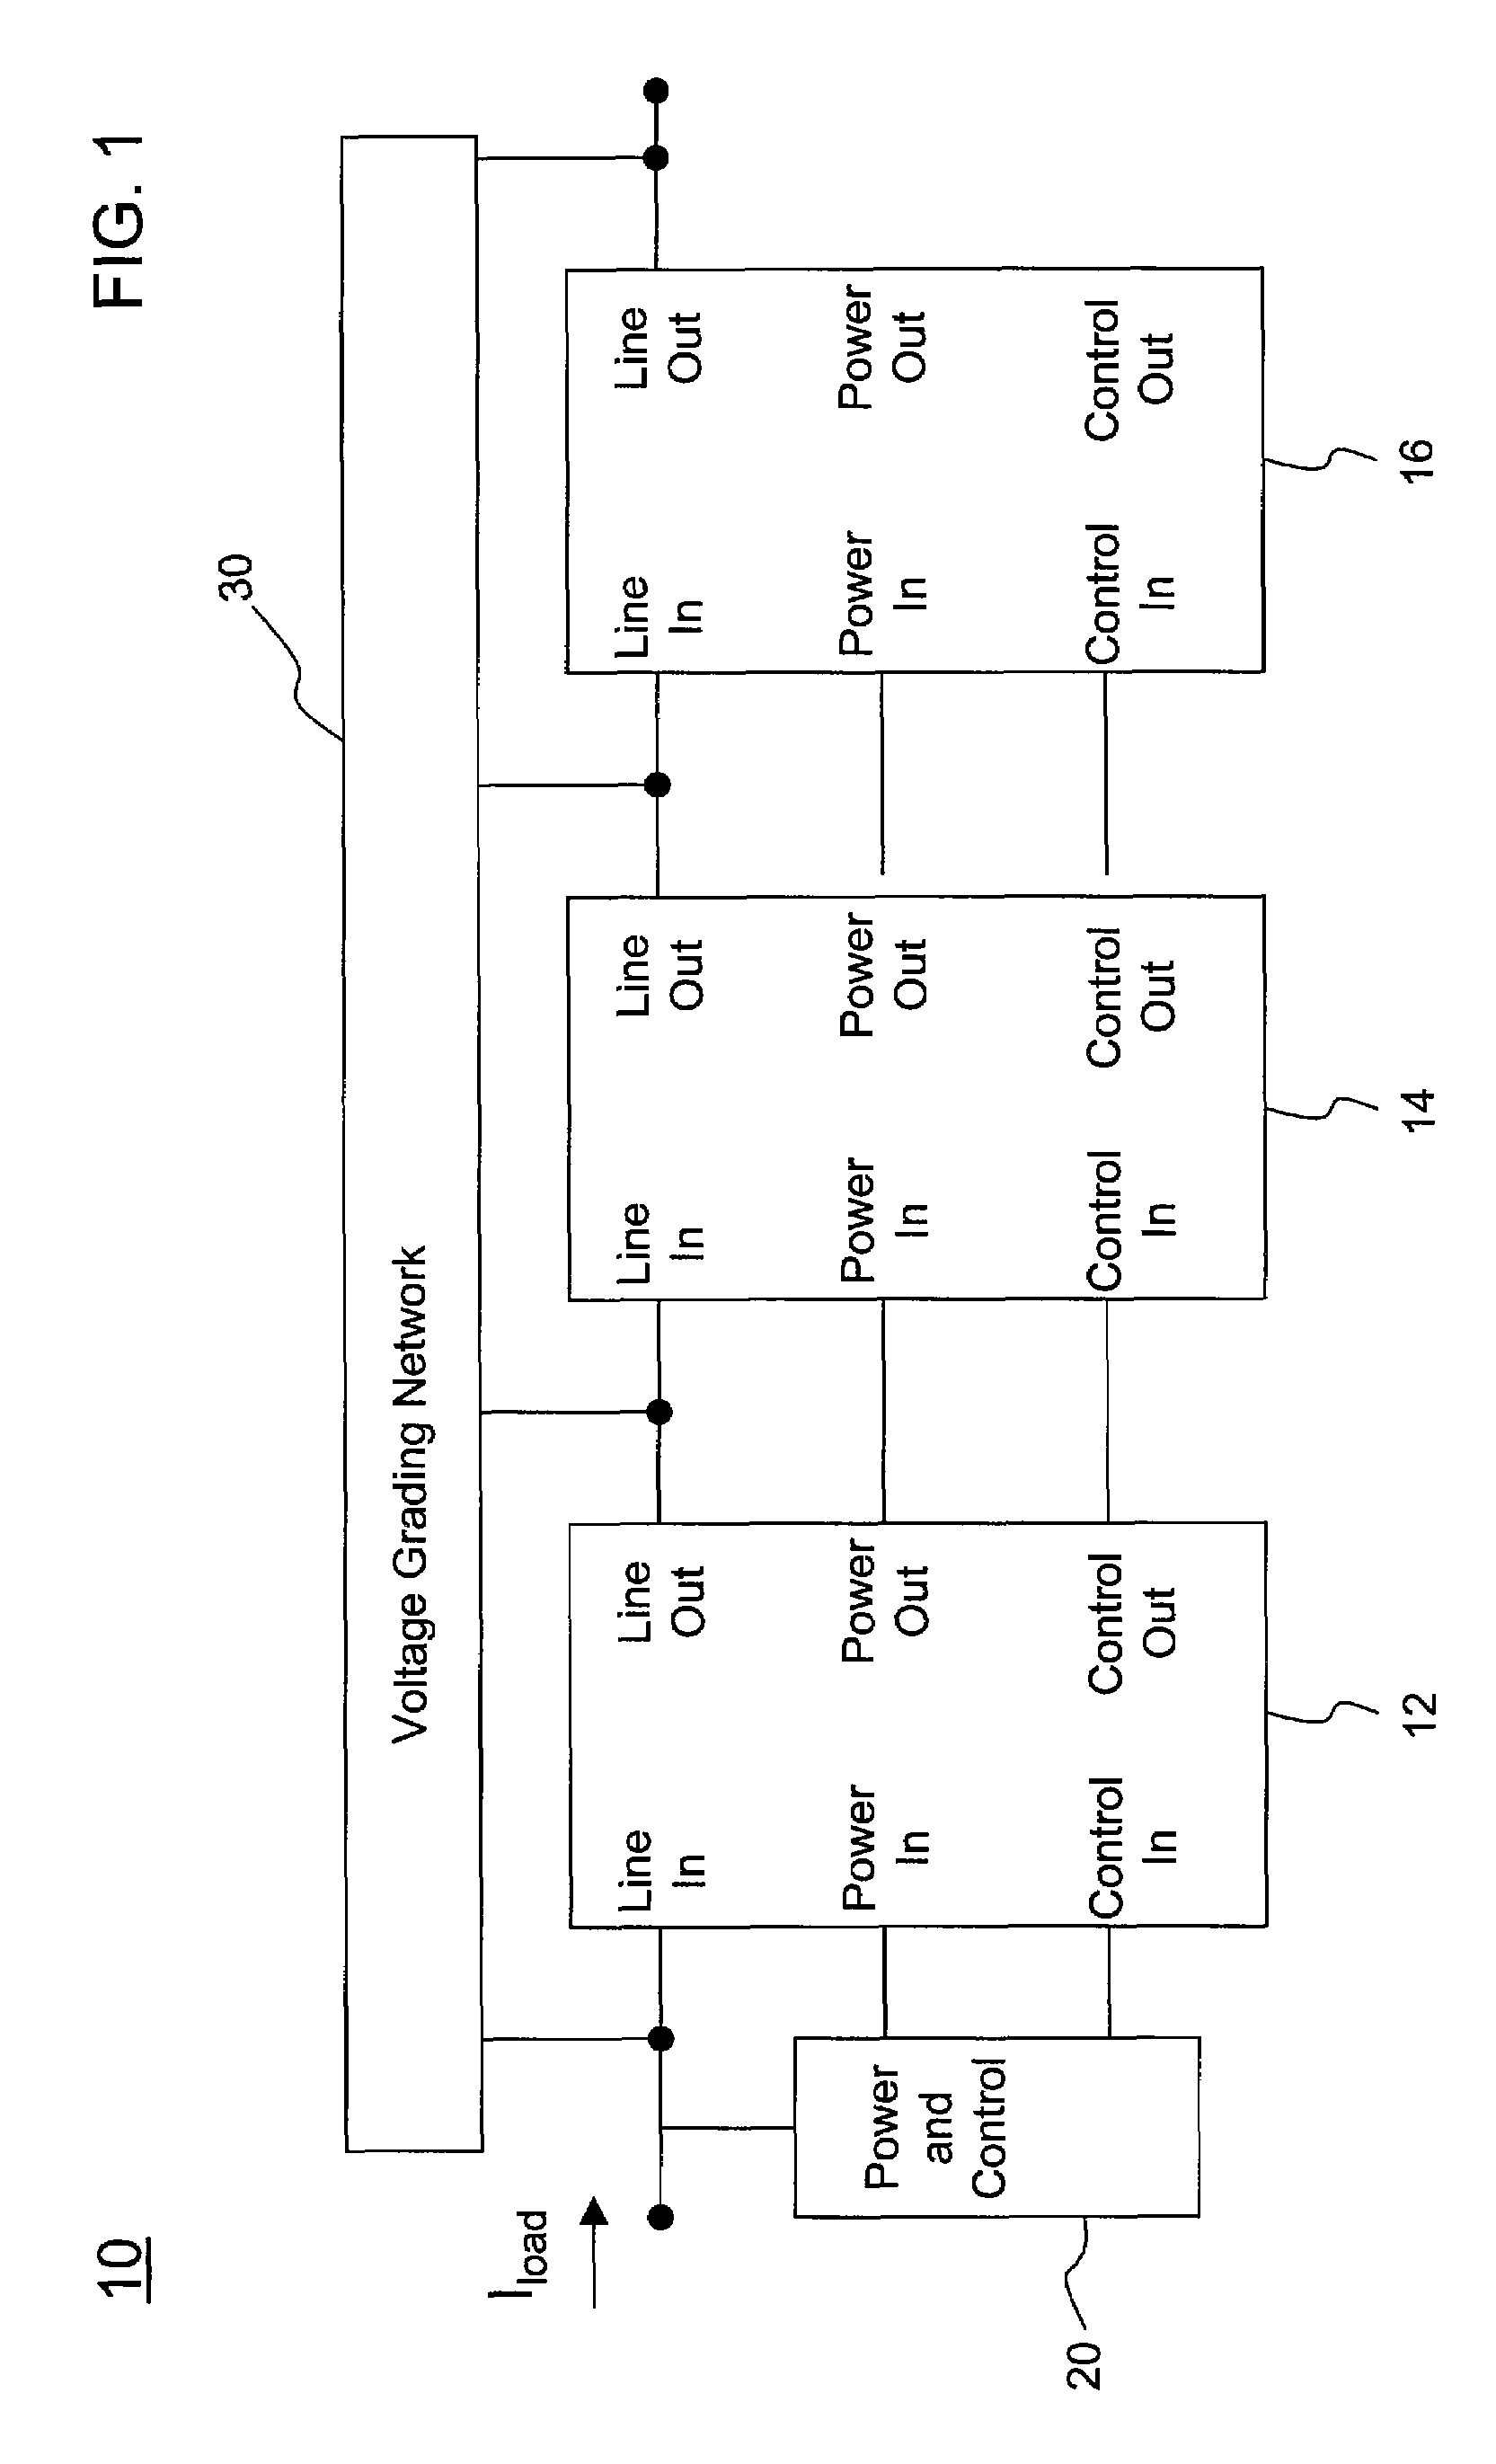 Micro-electromechanical system based switching module serially stackable with other such modules to meet a voltage rating